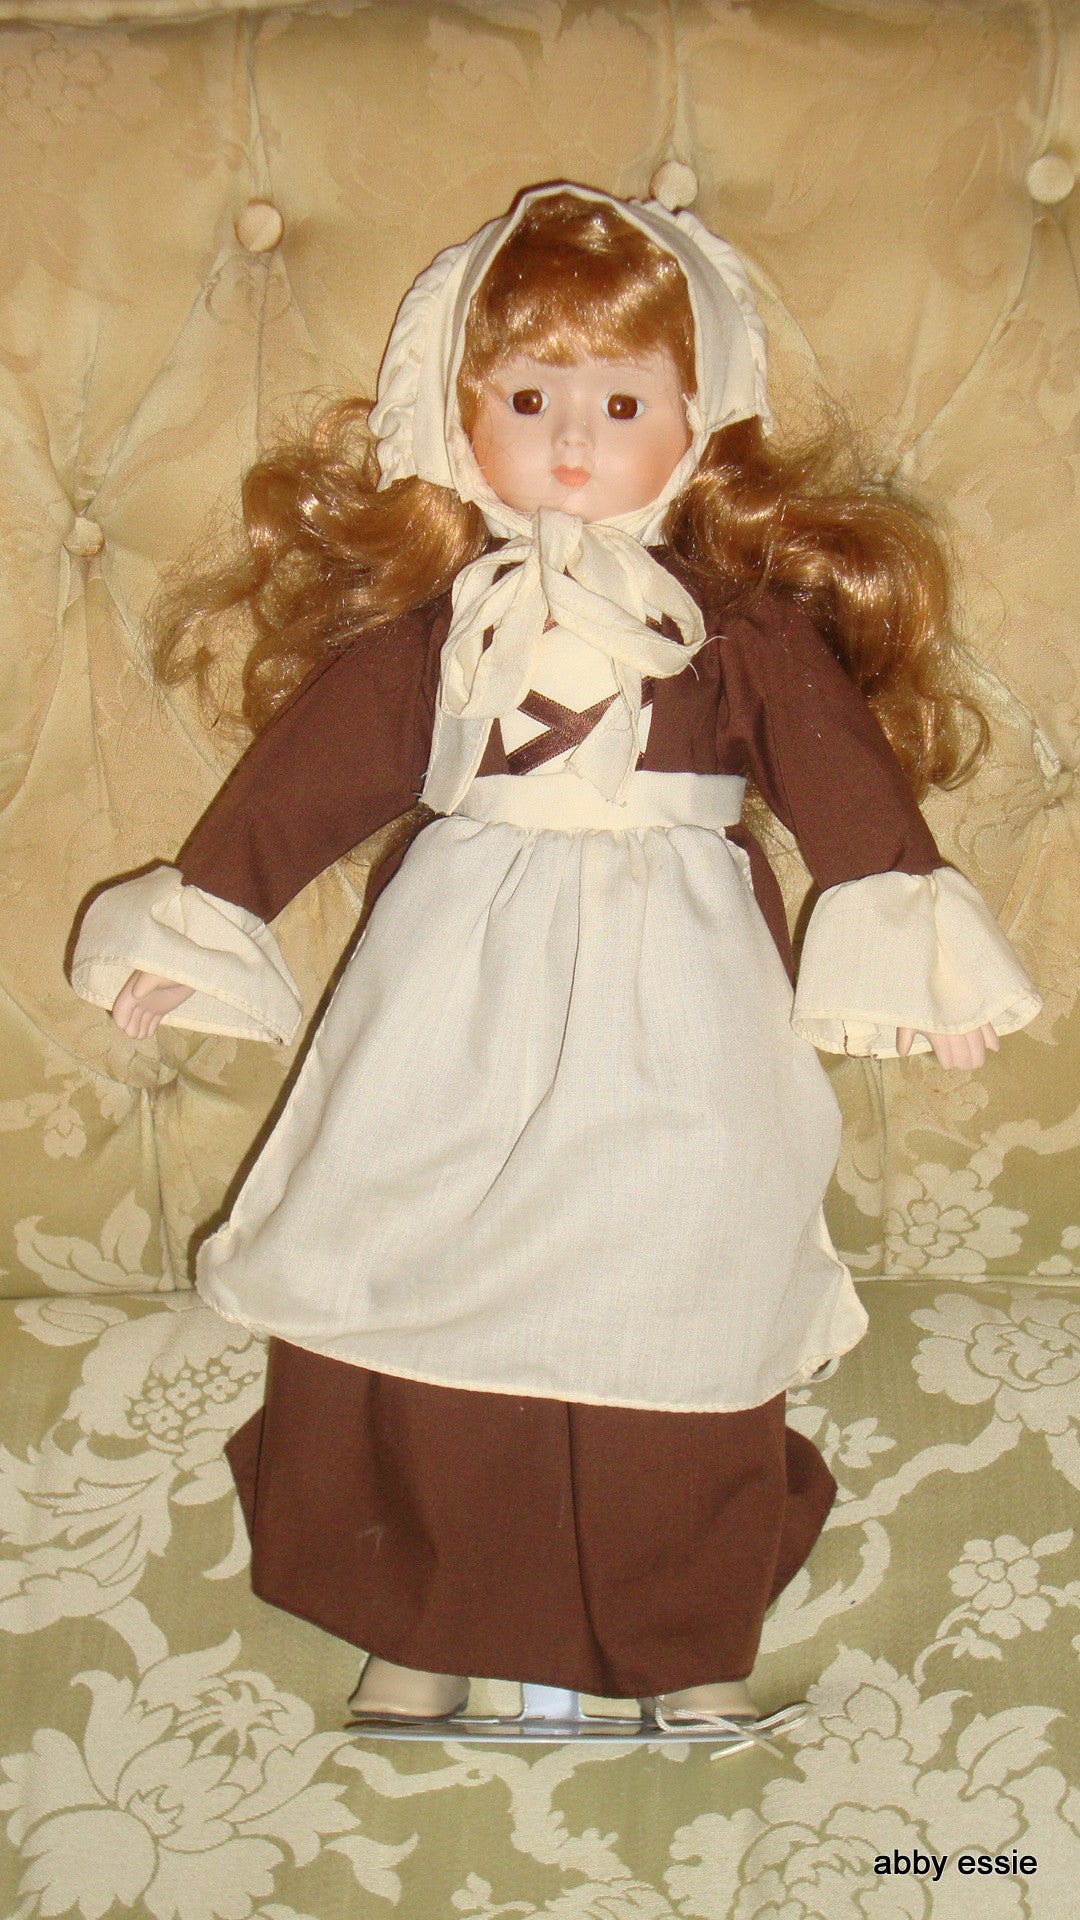 VINTAGE PORCELAIN VICTORIAN ENGLISH 19TH 18TH CENTURY DOLL ON STAND WIT Abby Essie